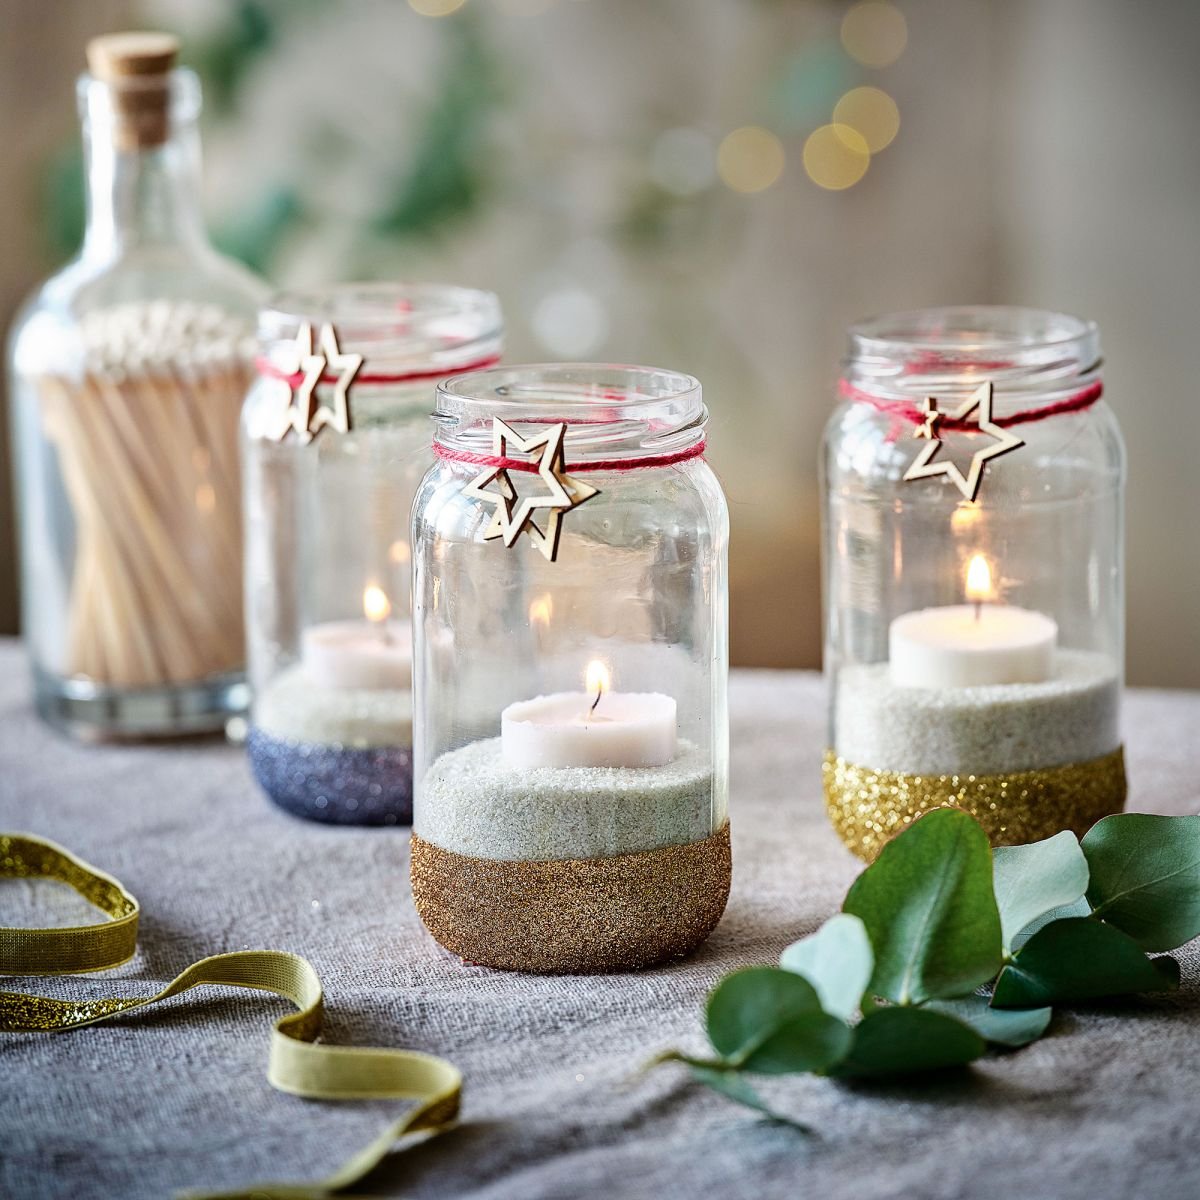 46 Budget Christmas decorating ideas for a frugal yet fabulous festive home